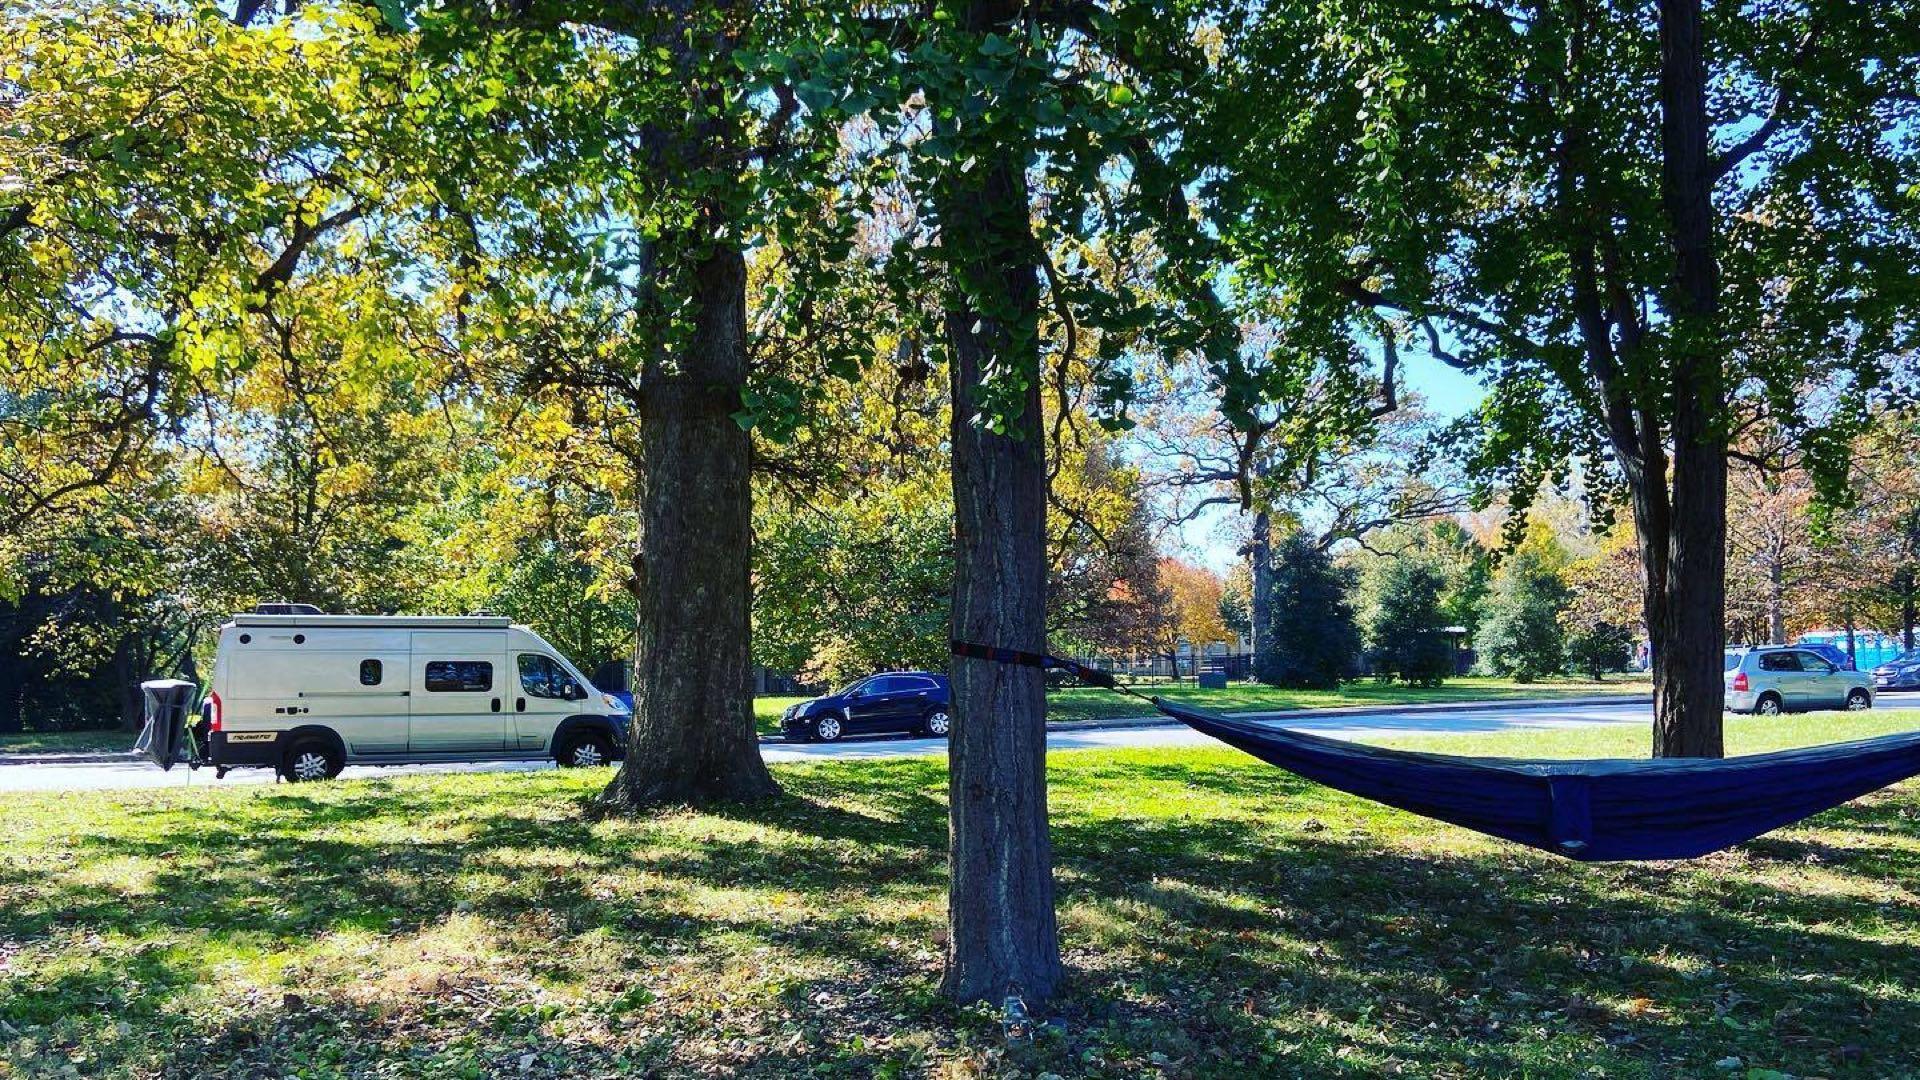 alt="Angela’s RV, left, parked by tall trees, two of which support a hammock, right"